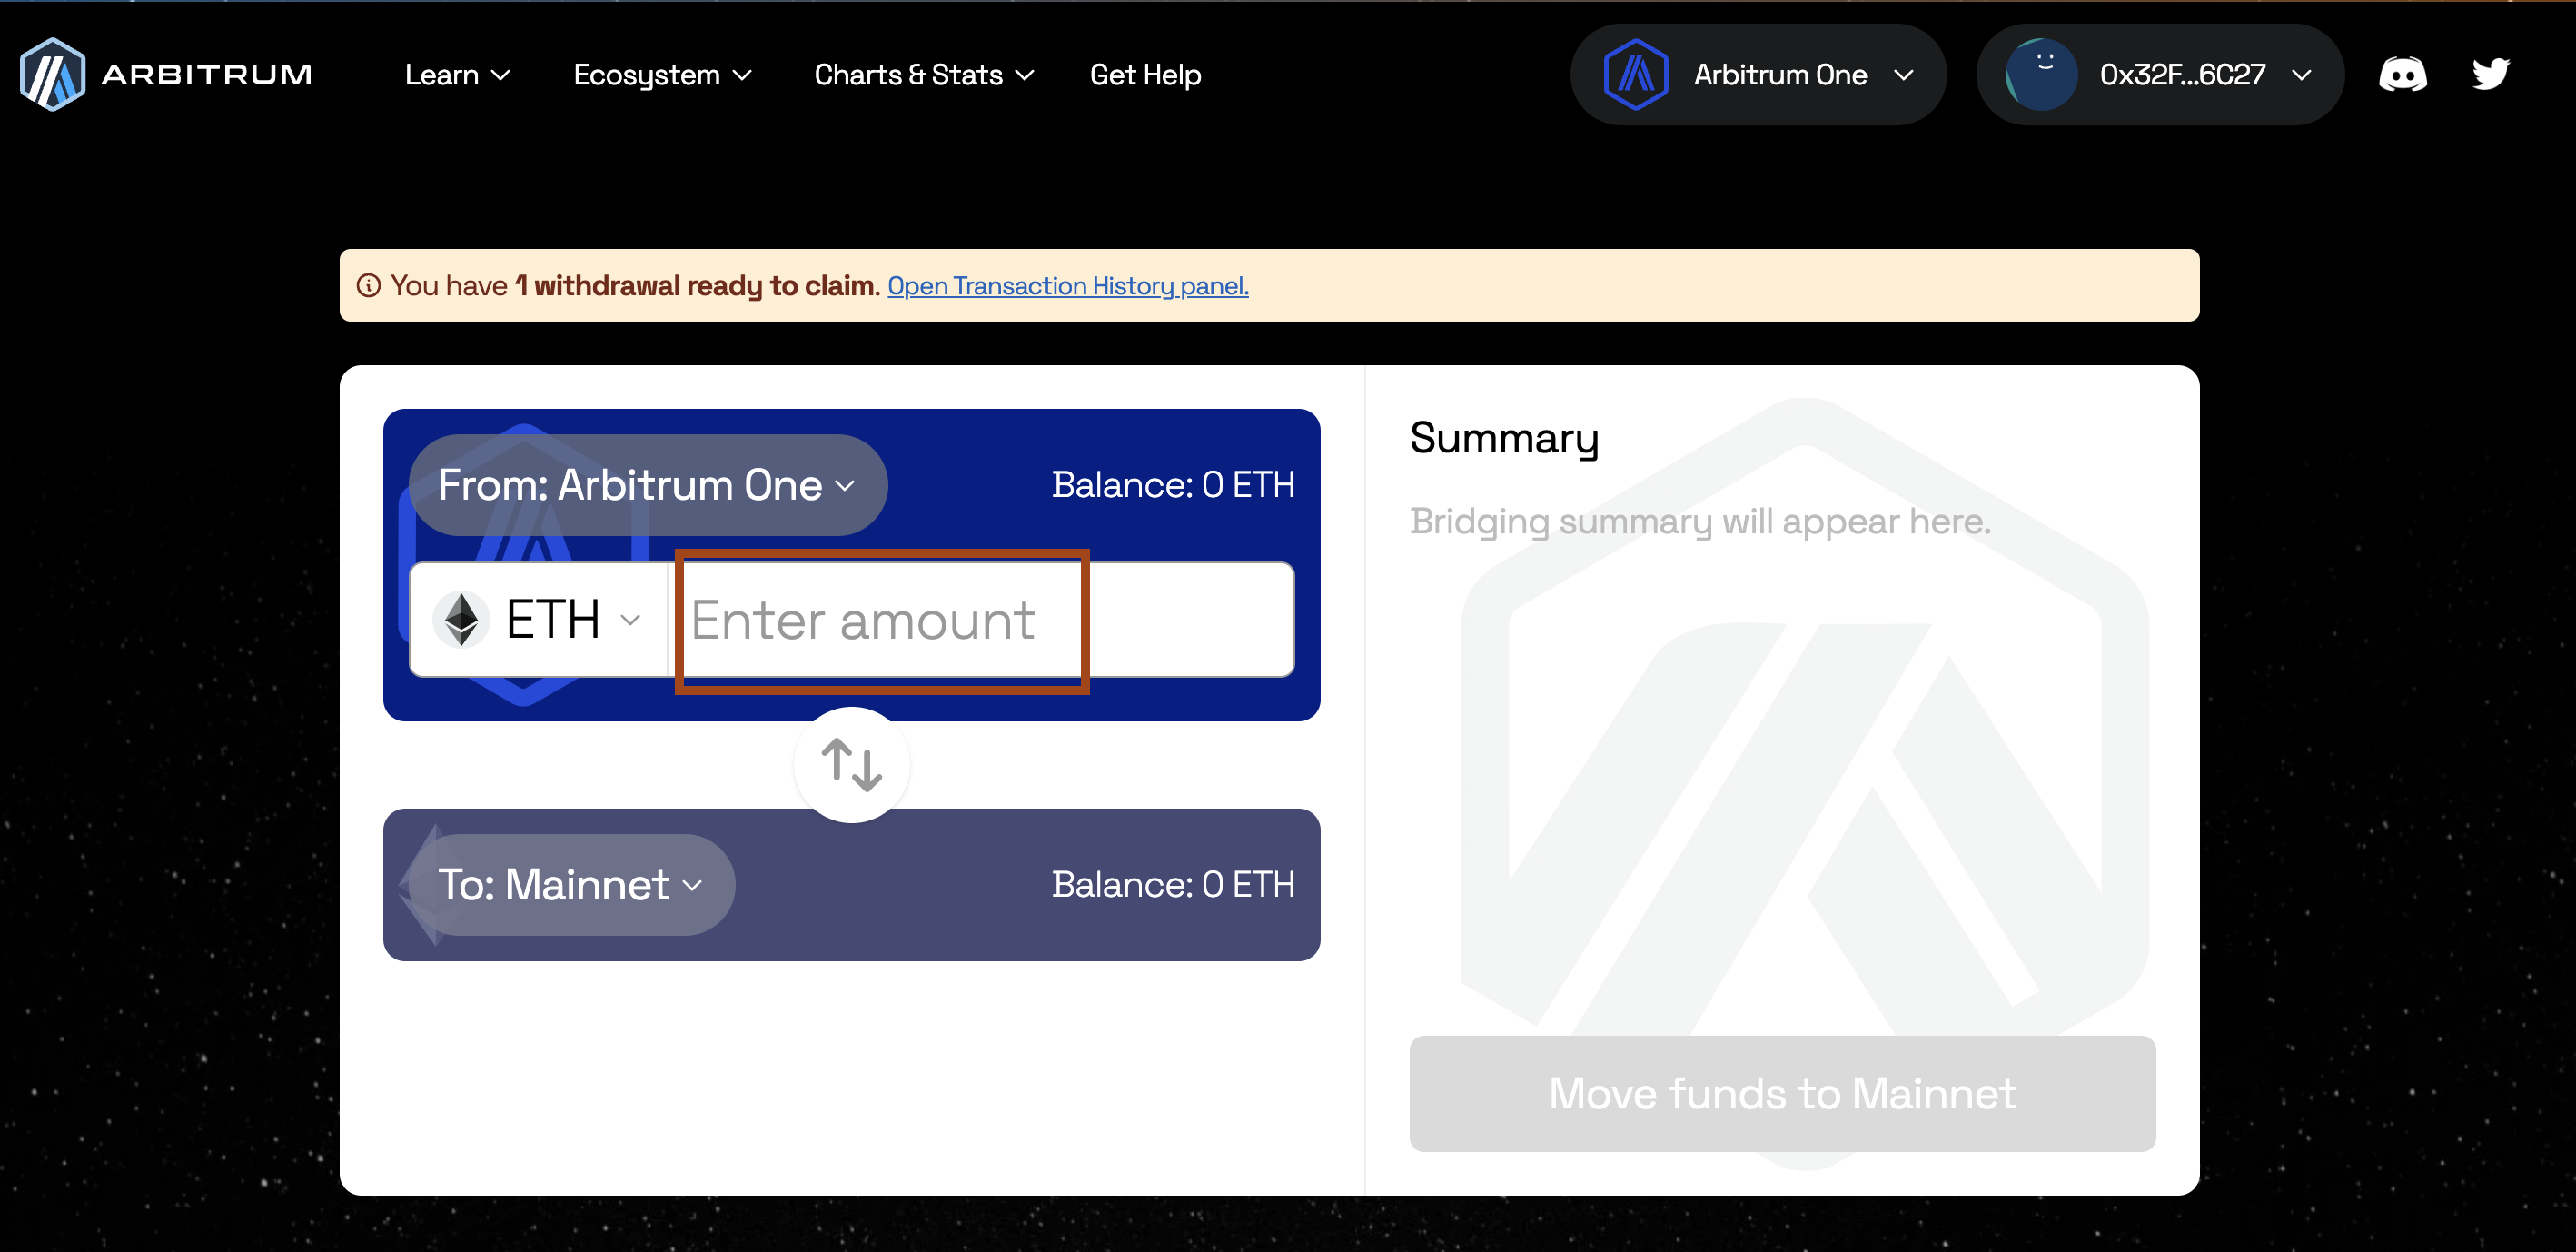 Enter the amount of token to withdraw